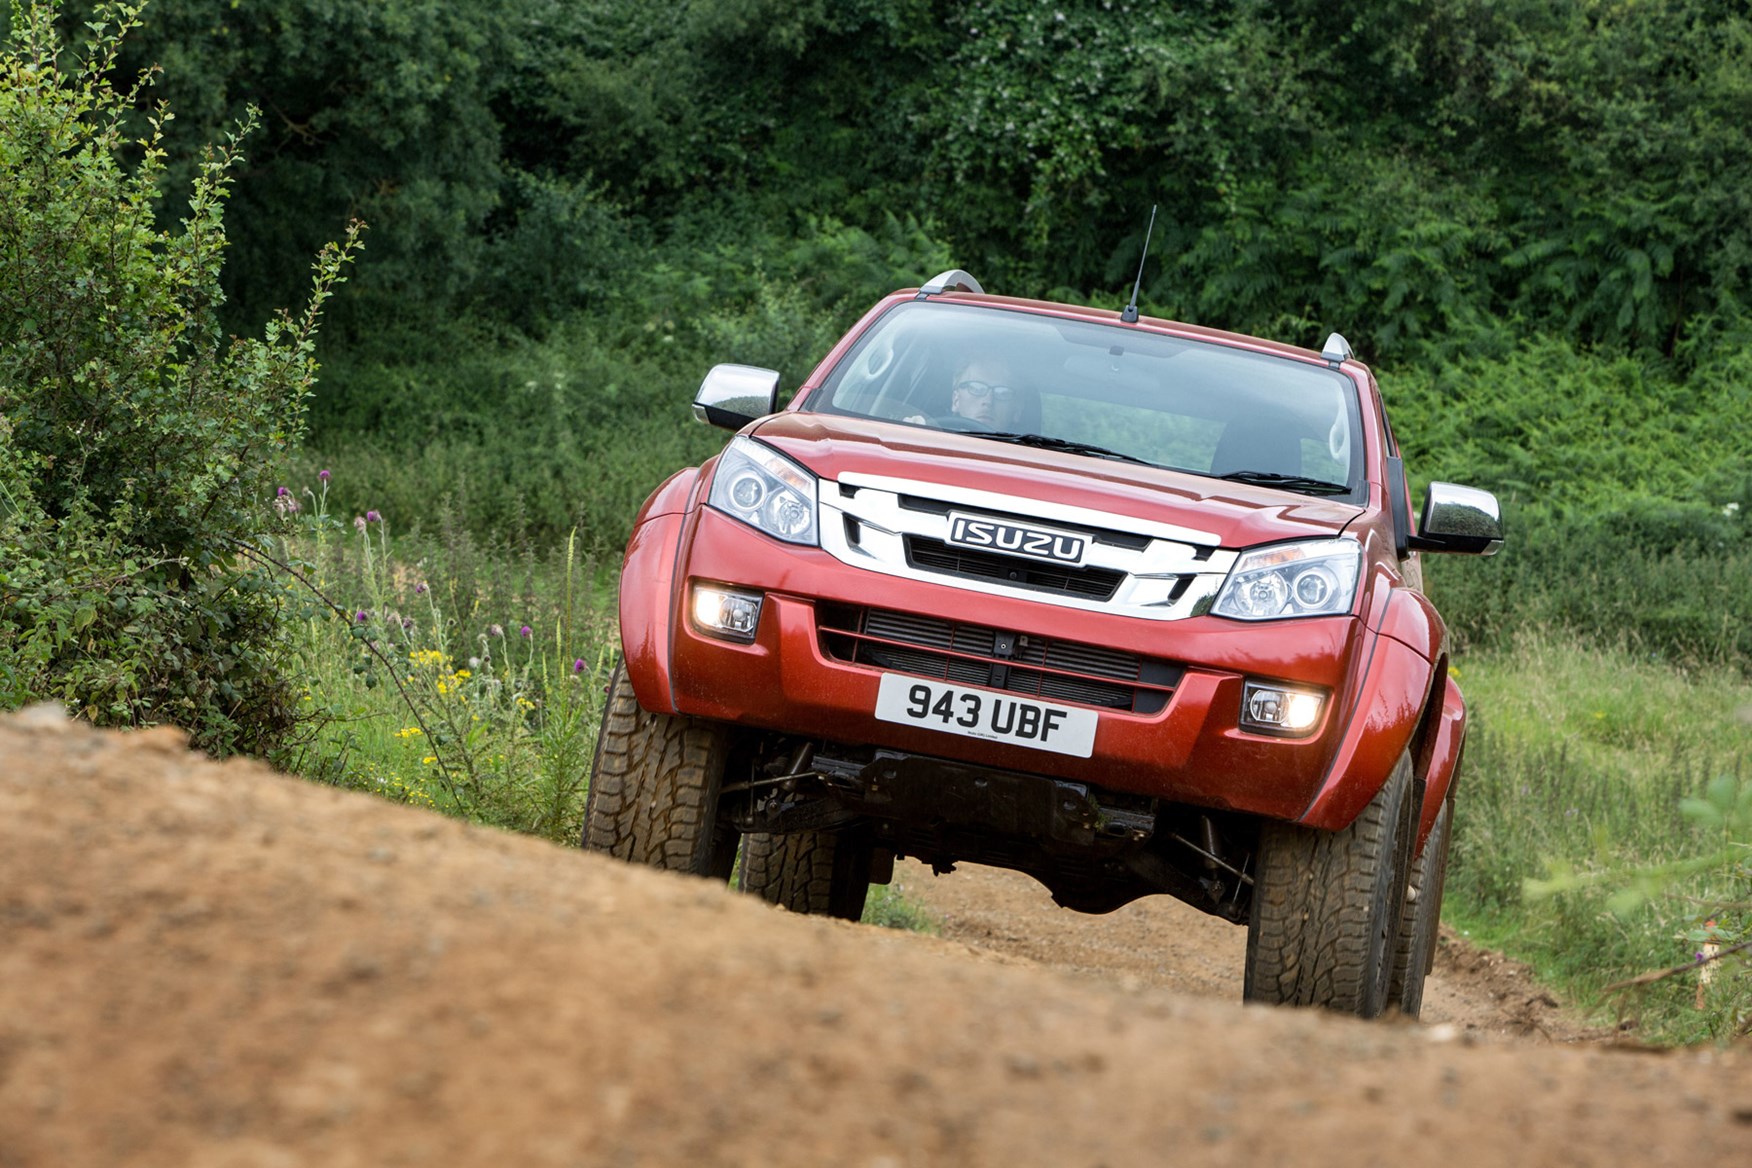 Isuzu D-Max full review on Parkers Vans - off-road